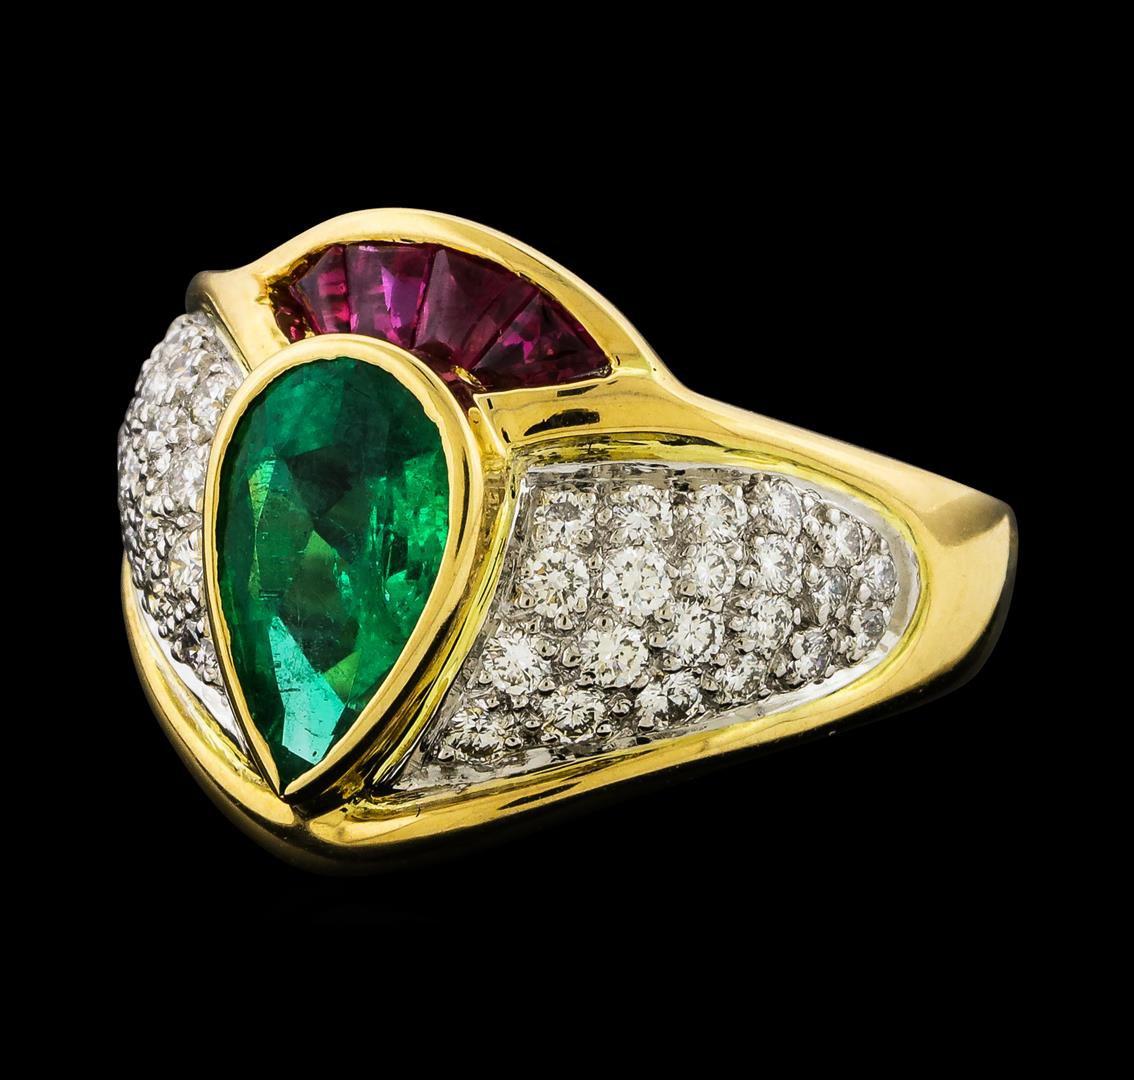 1.32 ctw Emerald and Diamond Ring - 18KT Yellow Gold